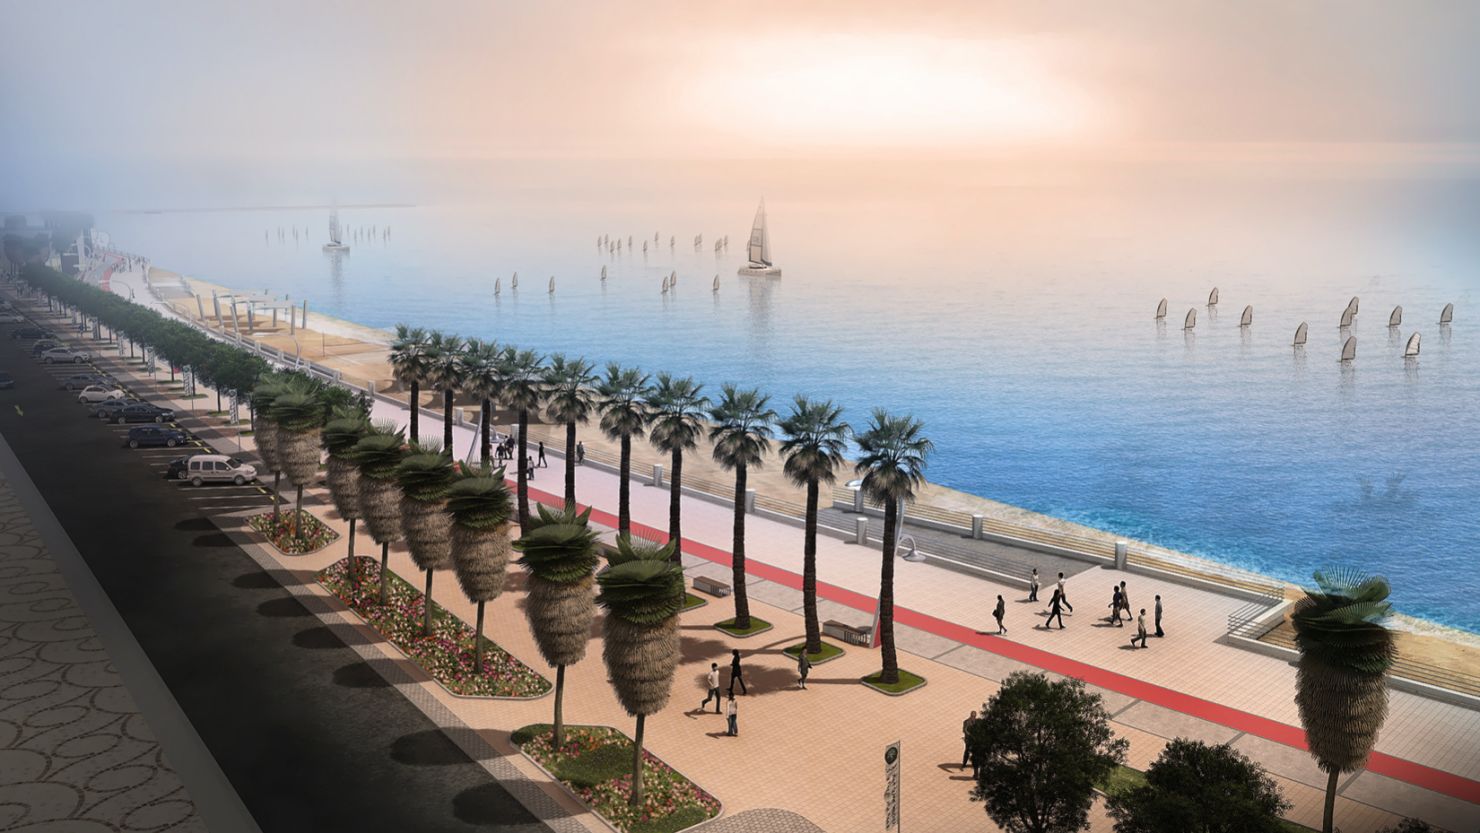 A rendering showing part of Bahrain's planned waterfront development.